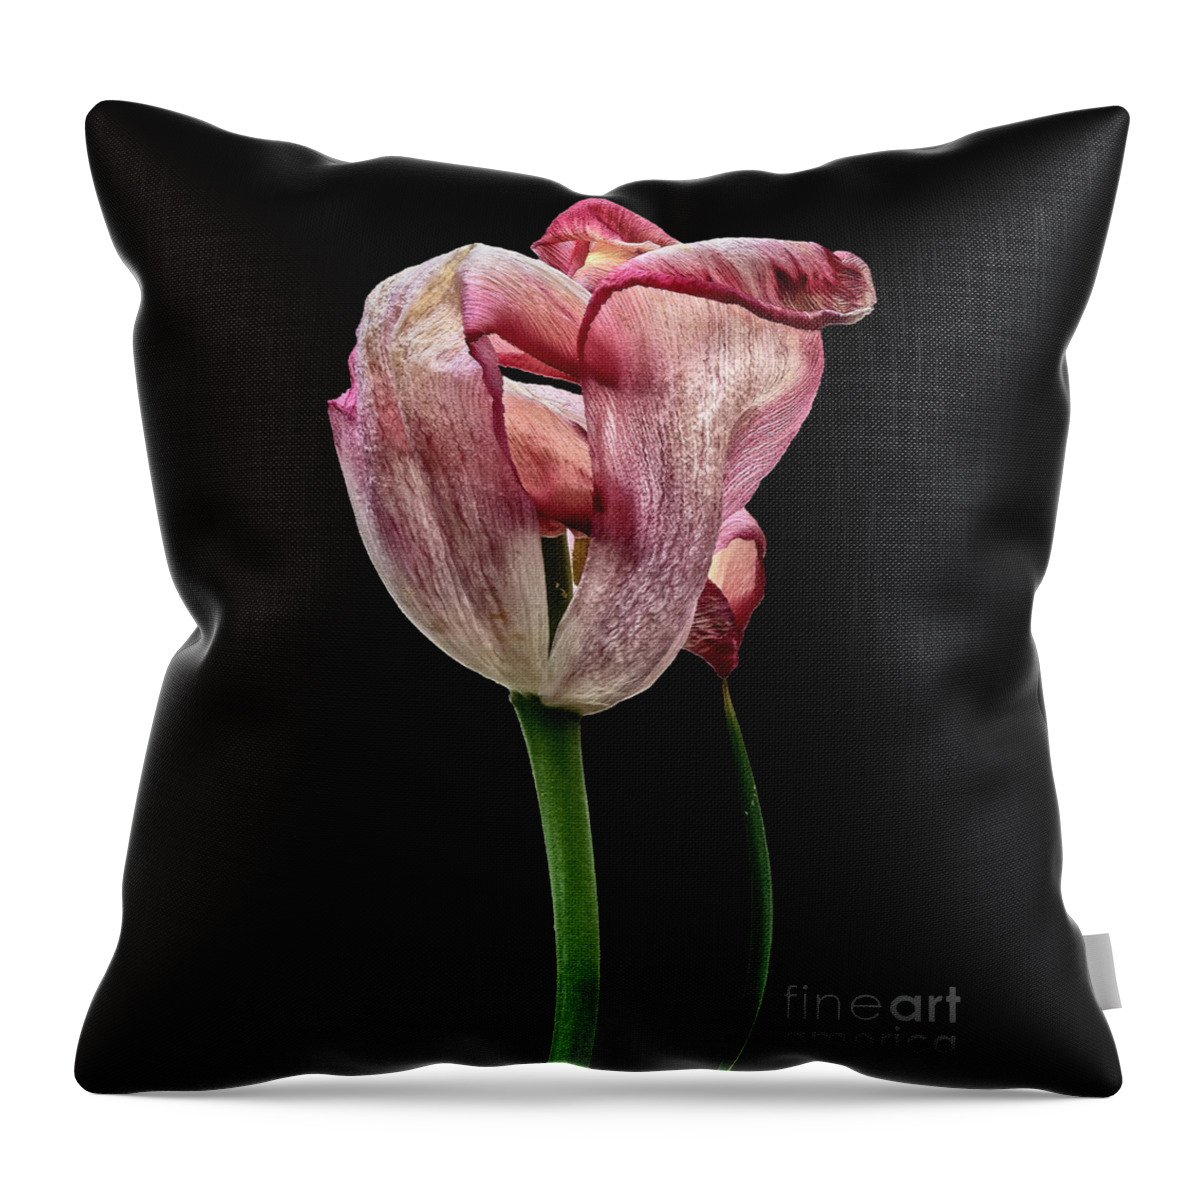 Withing Tulip Flower Associations Surreal Creative Beauty Beautiful Touching Weird Bizarre Eccentric Odd Peculiar Outlandish Unusual Imaginative Appealing Emotional Beautiful Wonderful Beauty Conceptual Singular Memorable Remarkable Striking Close Up Splendid Stunning Dramatic Impressive Effective Powerful Strong Meaningful Stylish Thoughtful Provocative Effective Telling Amazing Thoughtful Expressive Attentive Creative Black Background Philosophical Mysterious Elegance Simplicity Textural Fun Throw Pillow featuring the photograph Happy withering tulip, beauty, thinker, black background,  by Tatiana Bogracheva